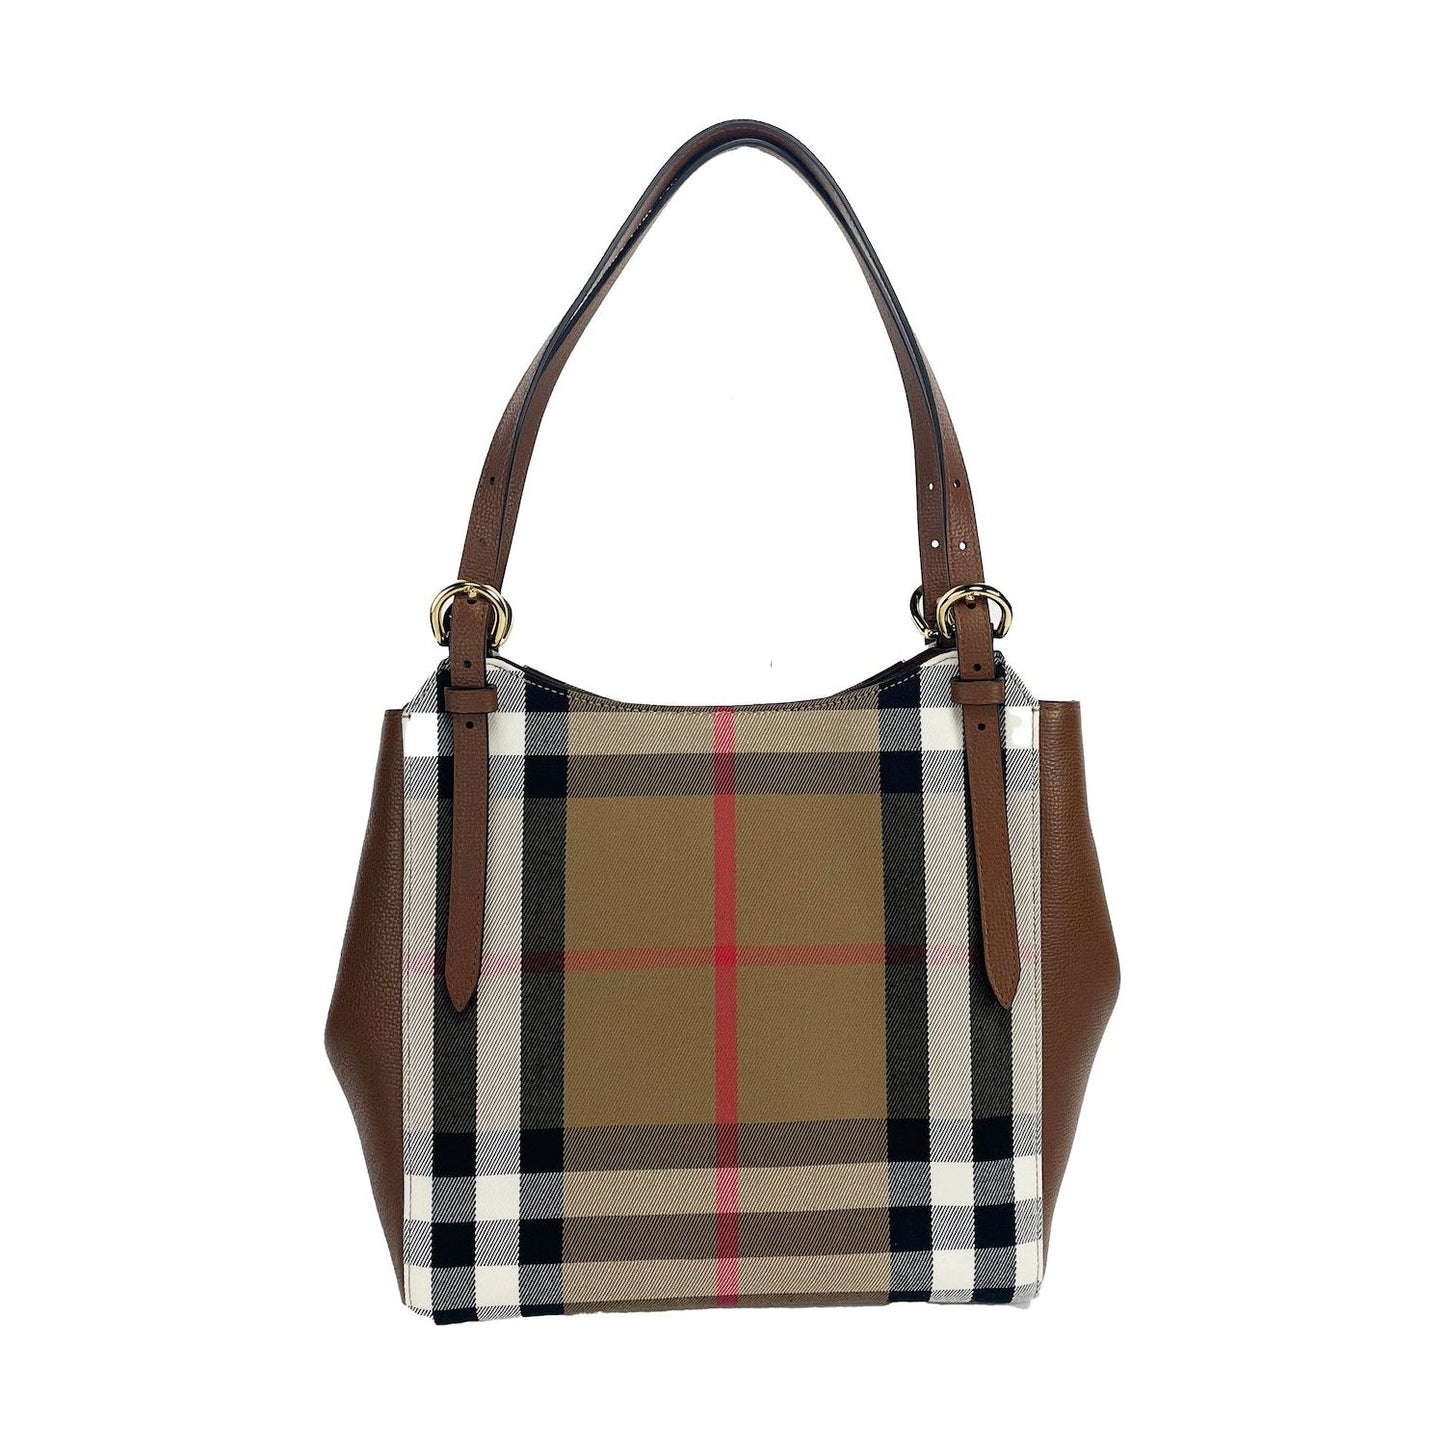 Burberry Small Canterby Tan Leather Check Canvas Tote Bag Purse small-canterby-tan-leather-check-canvas-tote-bag-purse